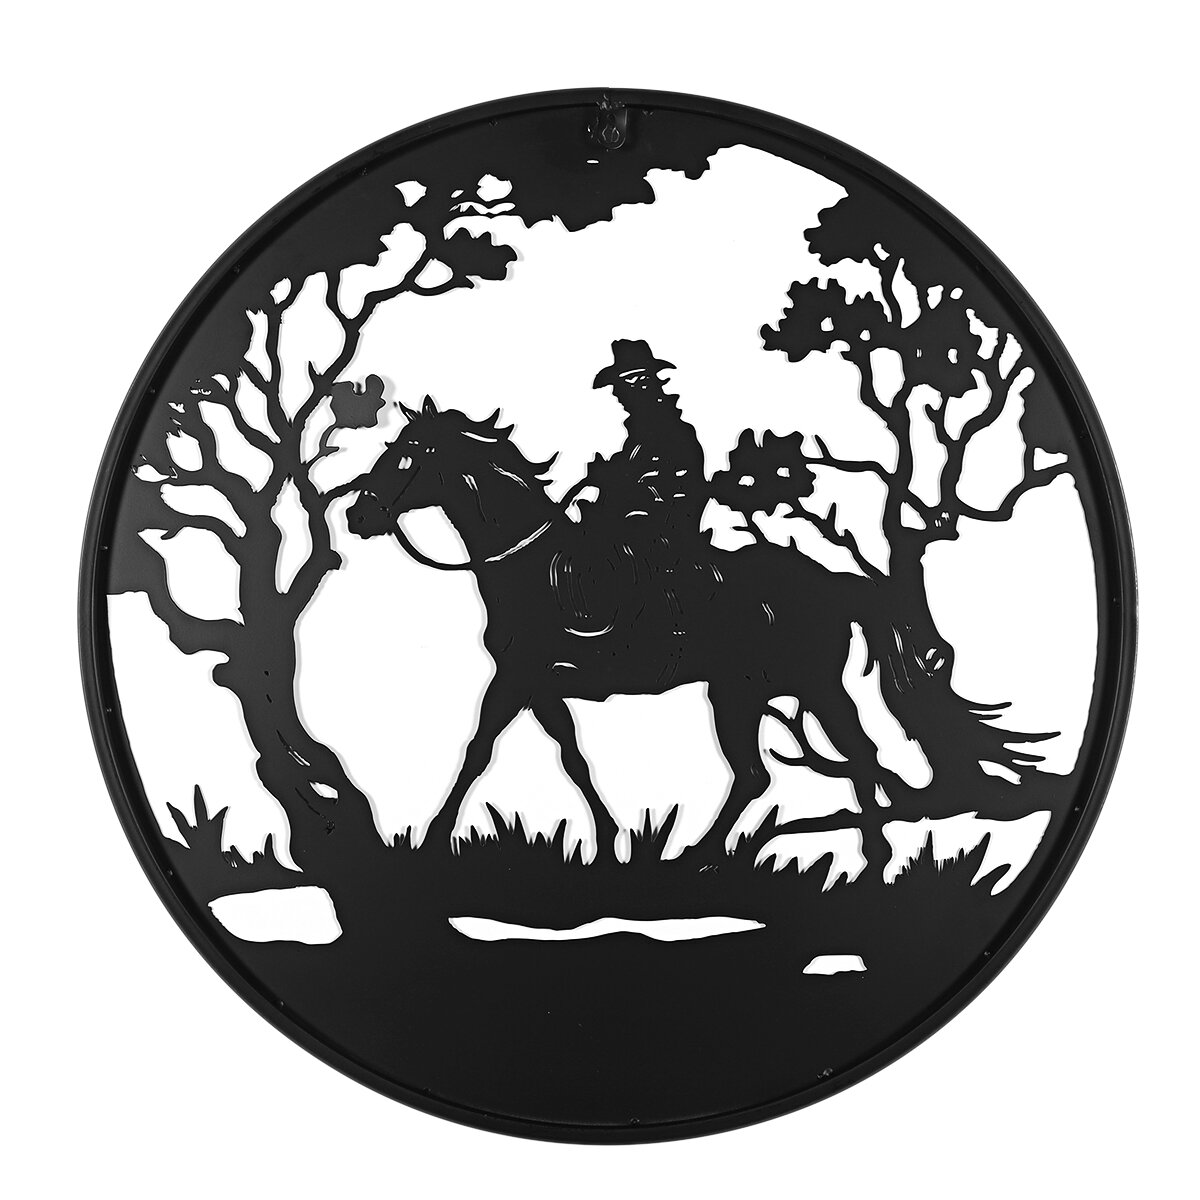 Man Riding Horse In Forest Round Black Metal Wall Hanging Art Decoration Room